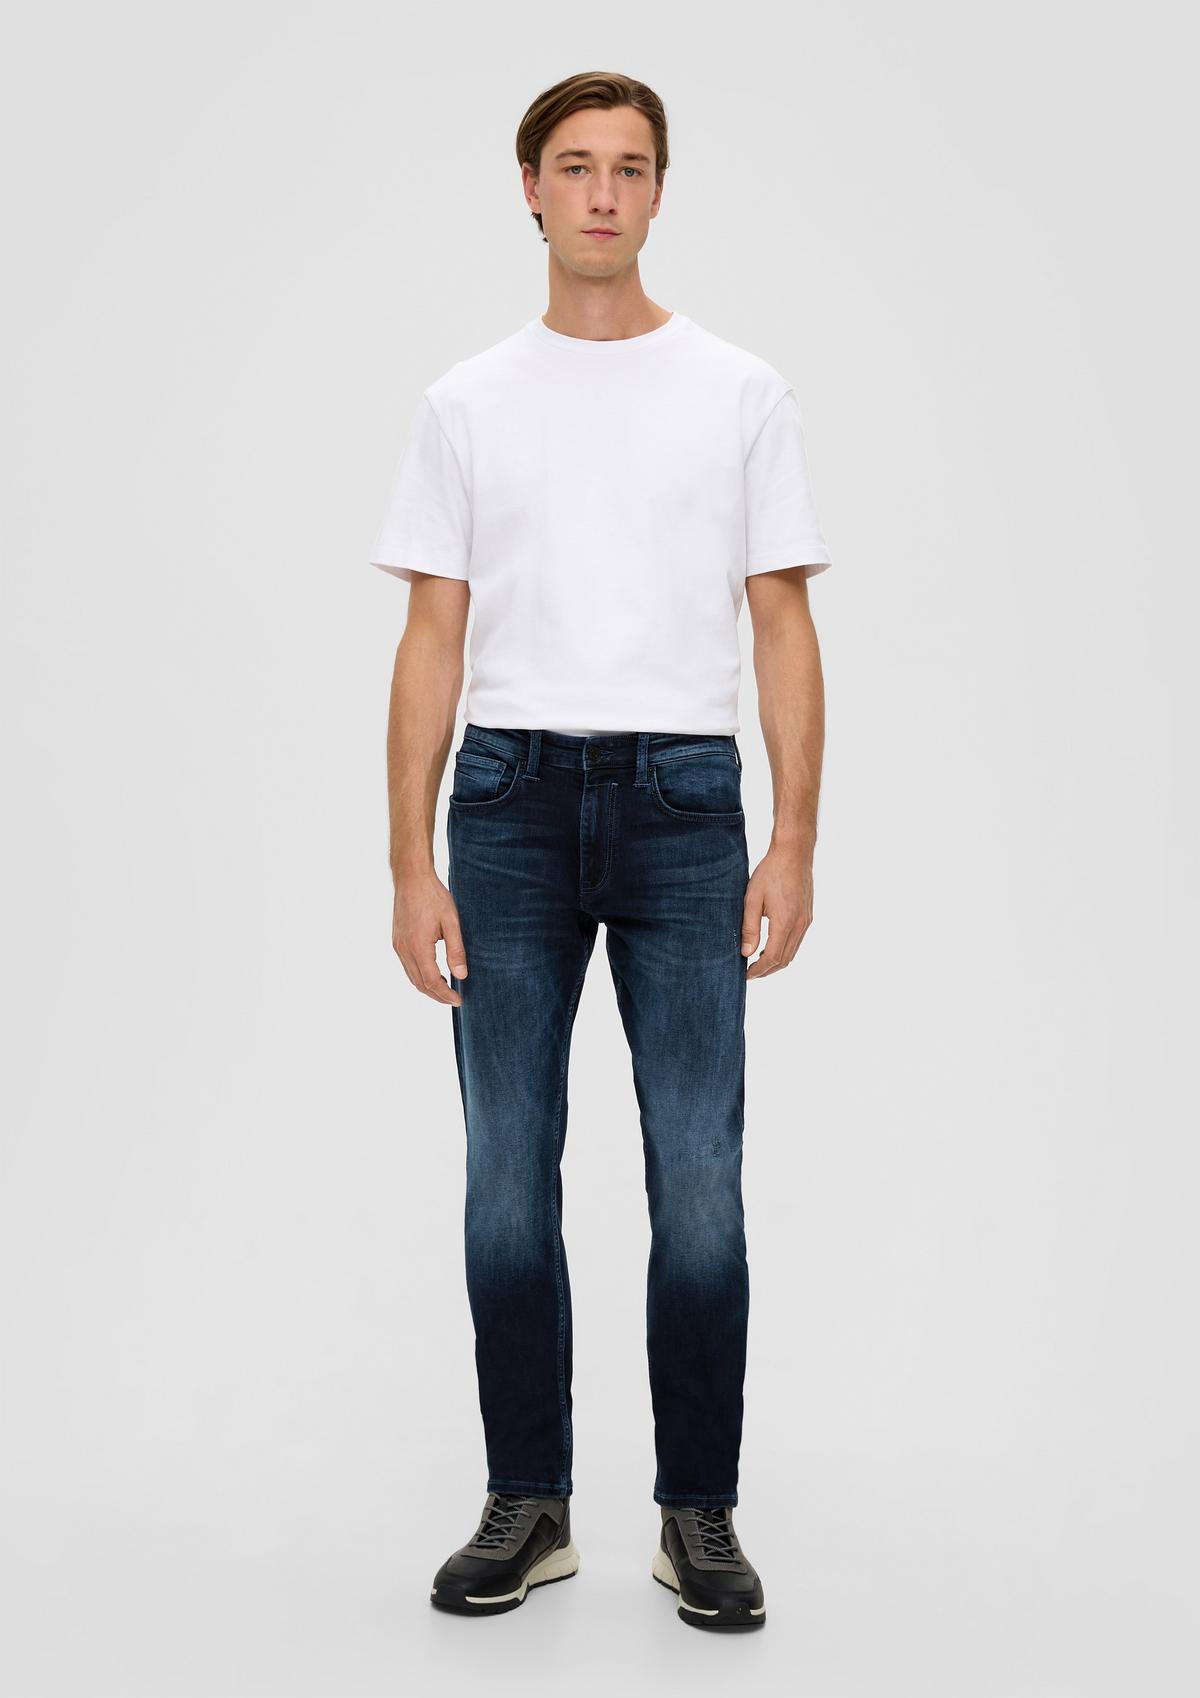 Jean / coupe Regular Fit / taille mi-haute / Tapered Leg / coupe 5 poches